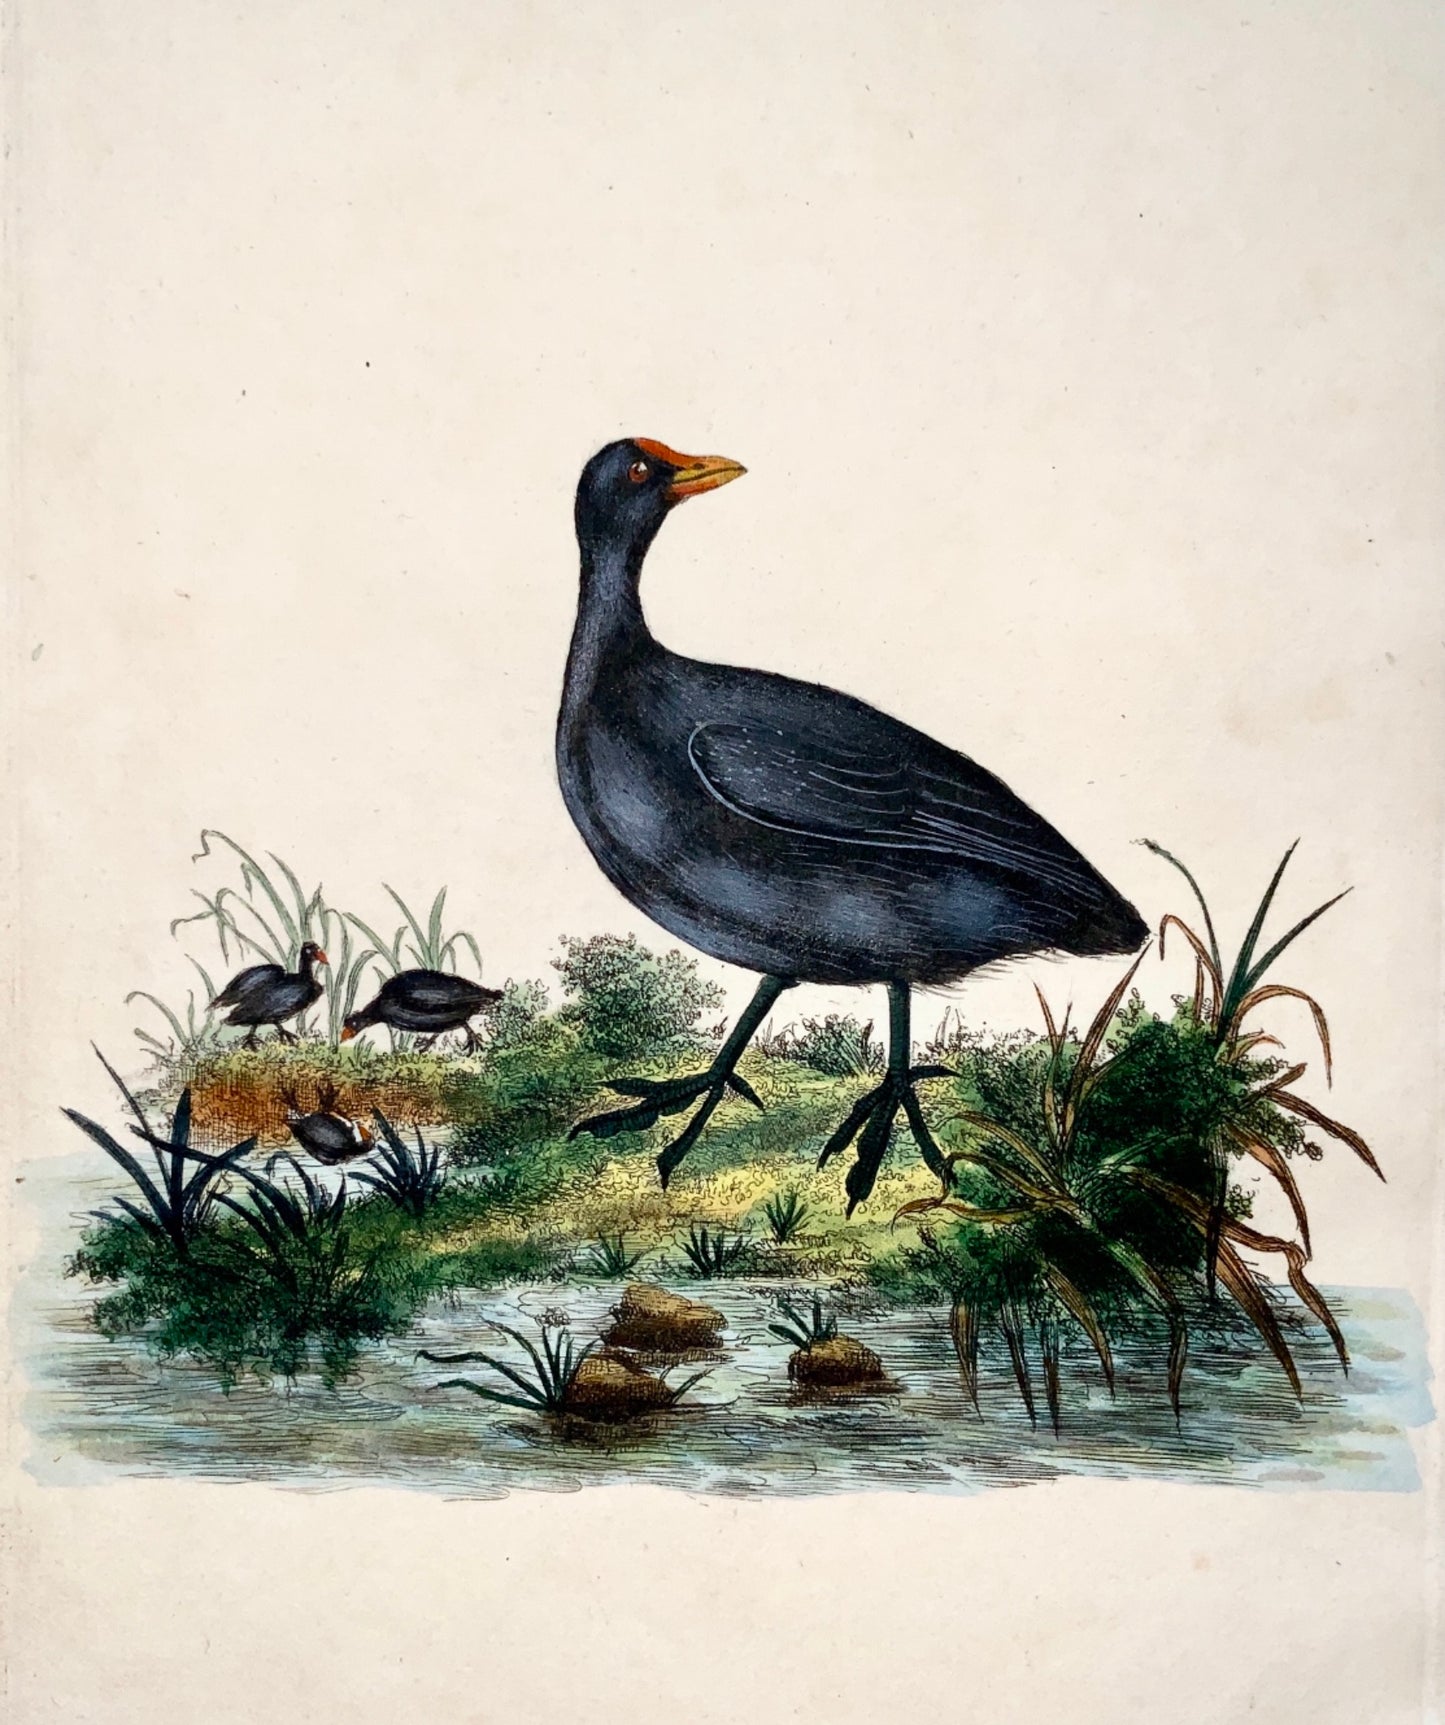 1794 Edward Donovan - COMMON COOT Ornithology - exquisite hand coloured copper engraving